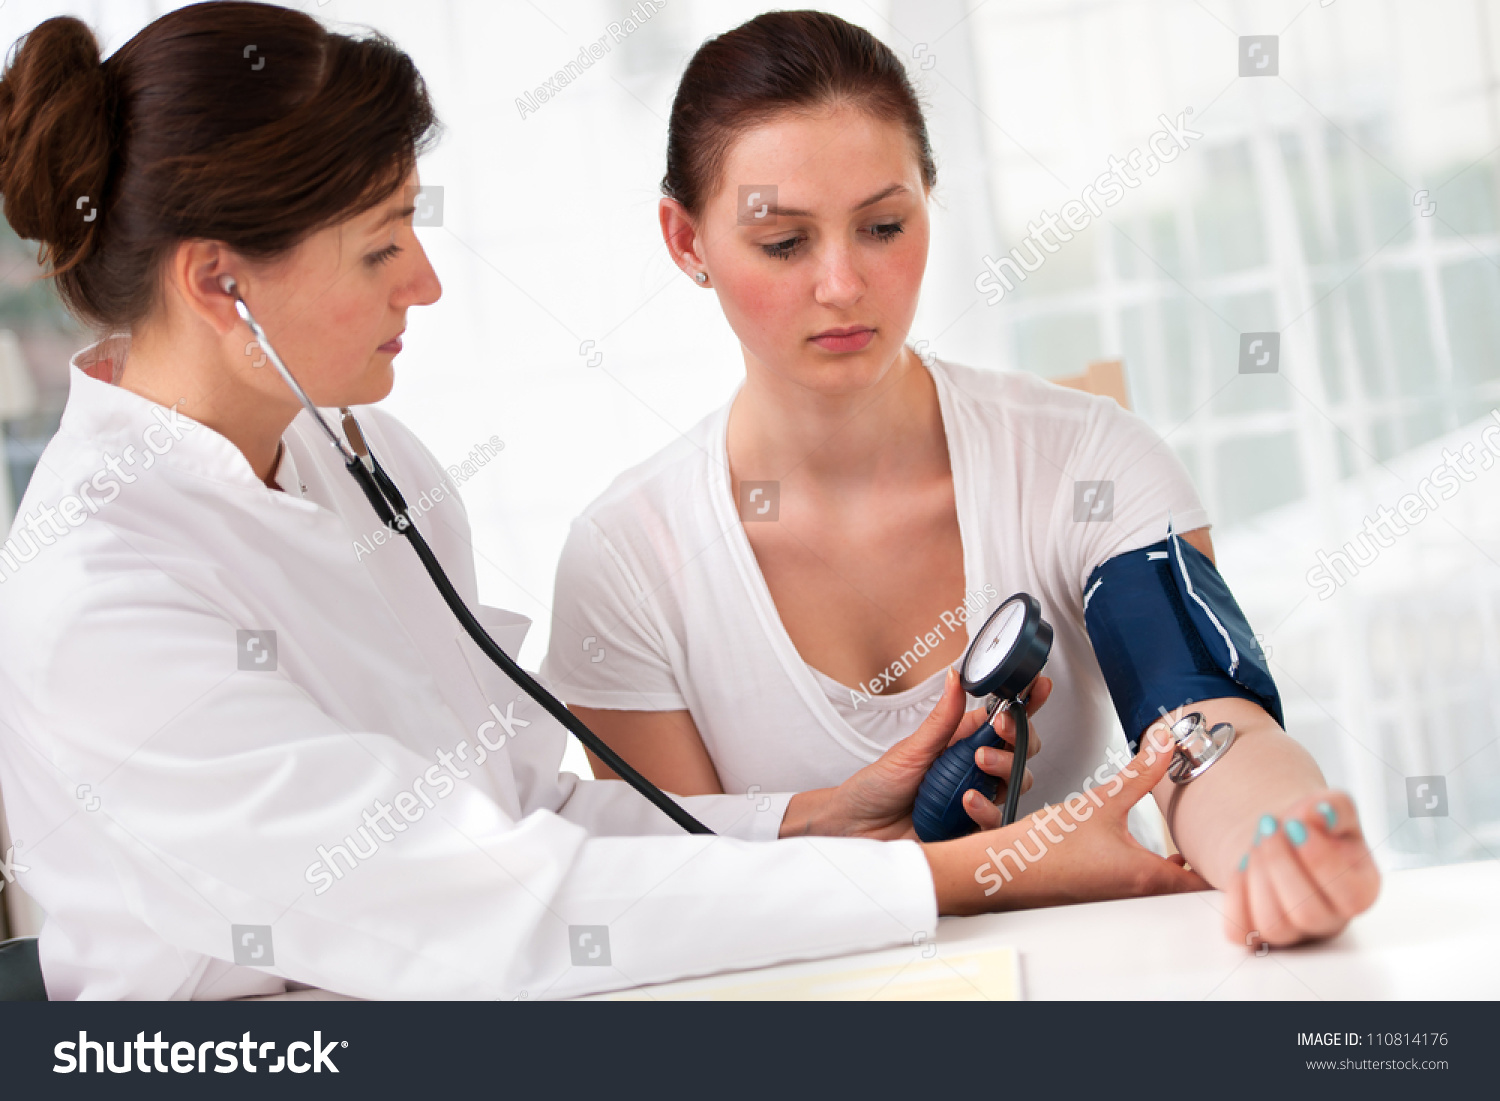 Woman having her blood pressure measured by doctor - Stock 